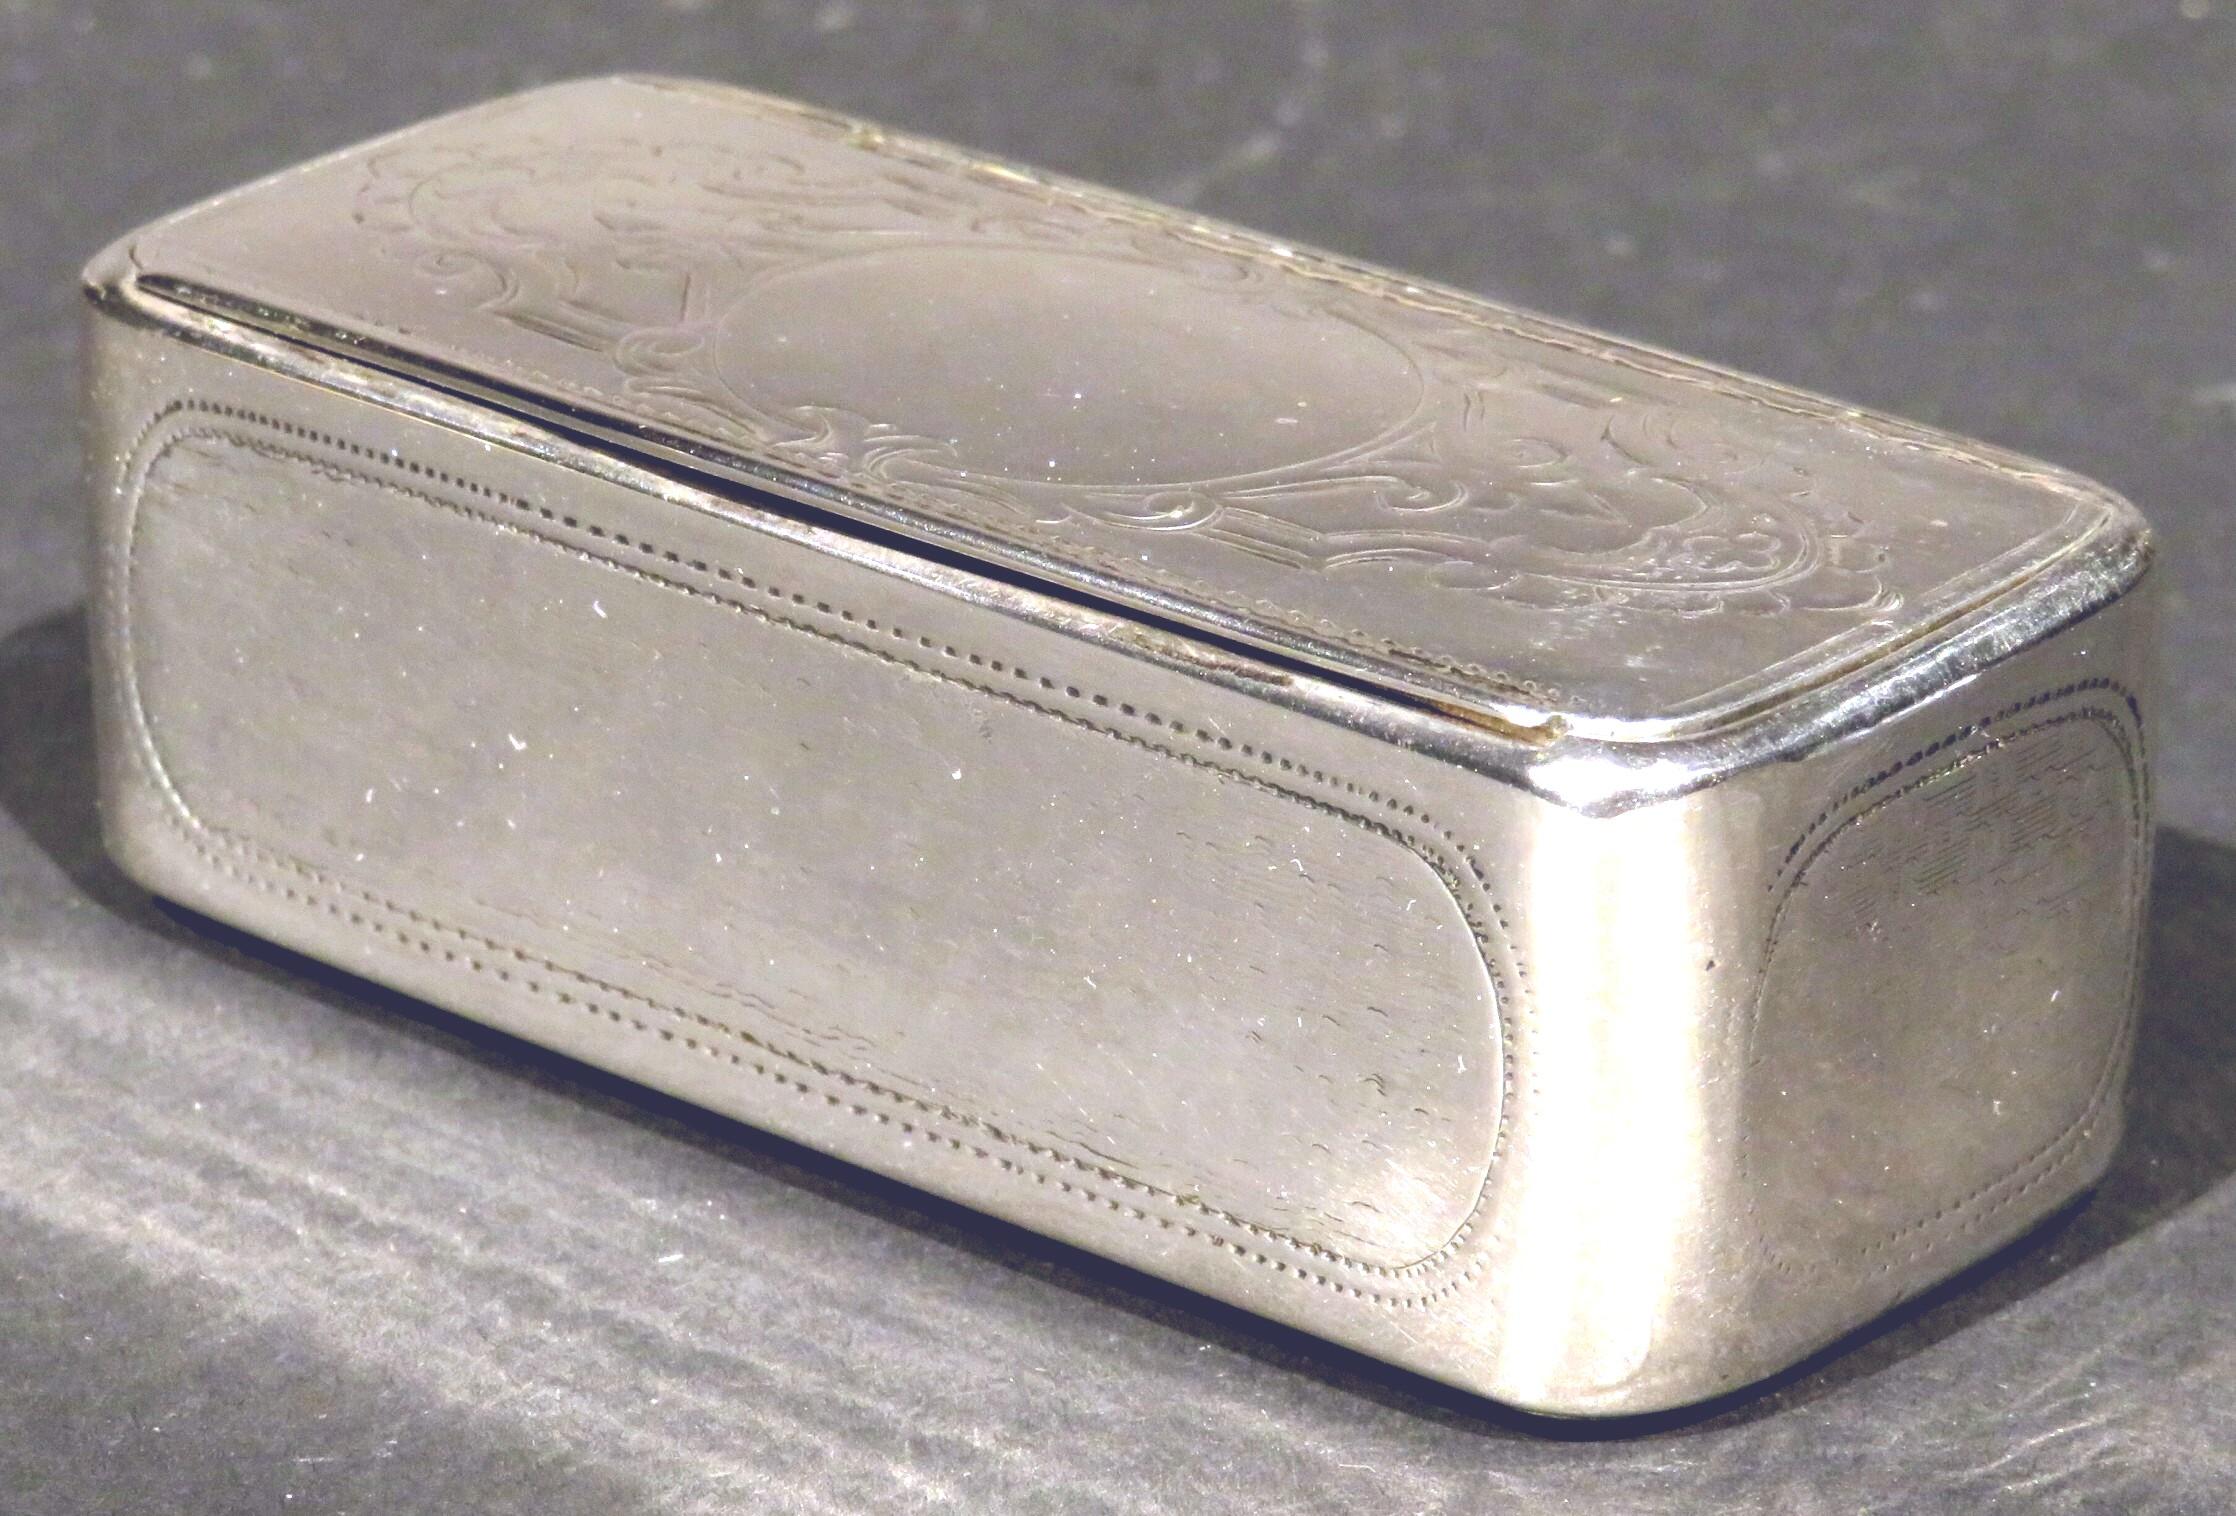 A very attractive mid-19th century Austrian silver (.800 fine) snuff box of oblong form, the exterior decorated with basket-weave motifs within oval cartouches, the hinged lid opening to a richly gilded interior with impressed town mark for Vienna